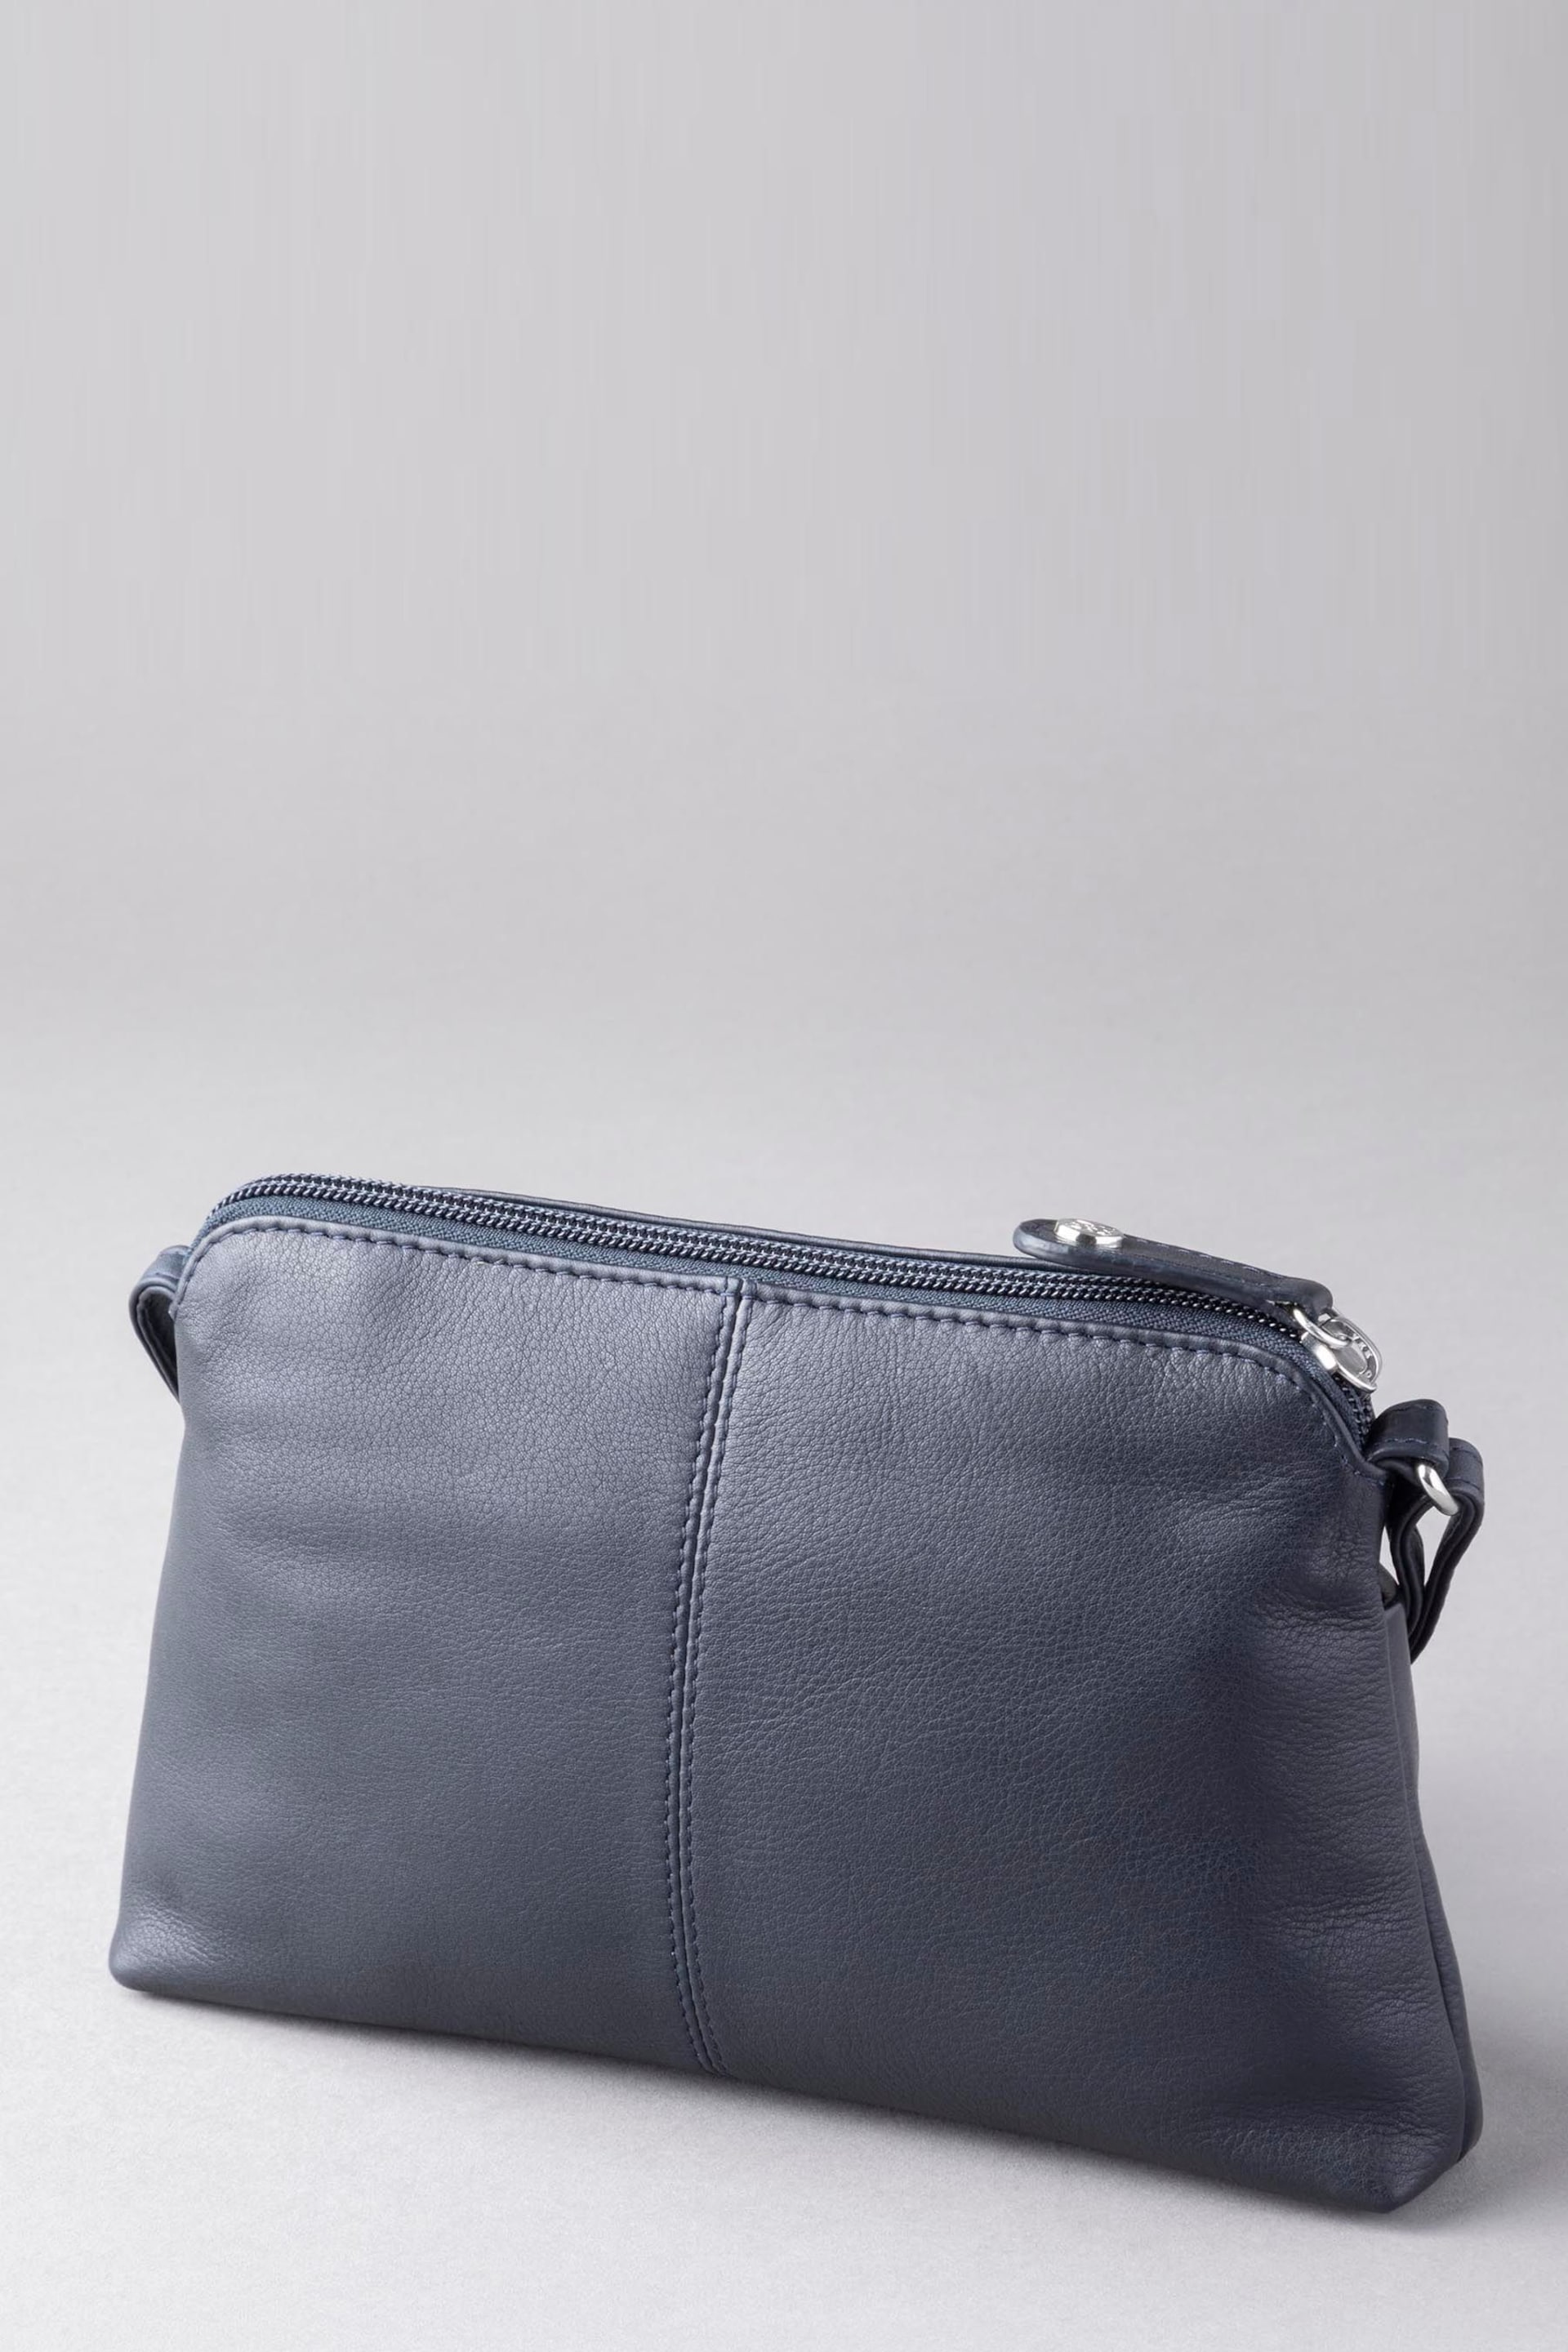 Lakeland Leather Blue Small Rydal Leather Cross-Body Bag - Image 1 of 4